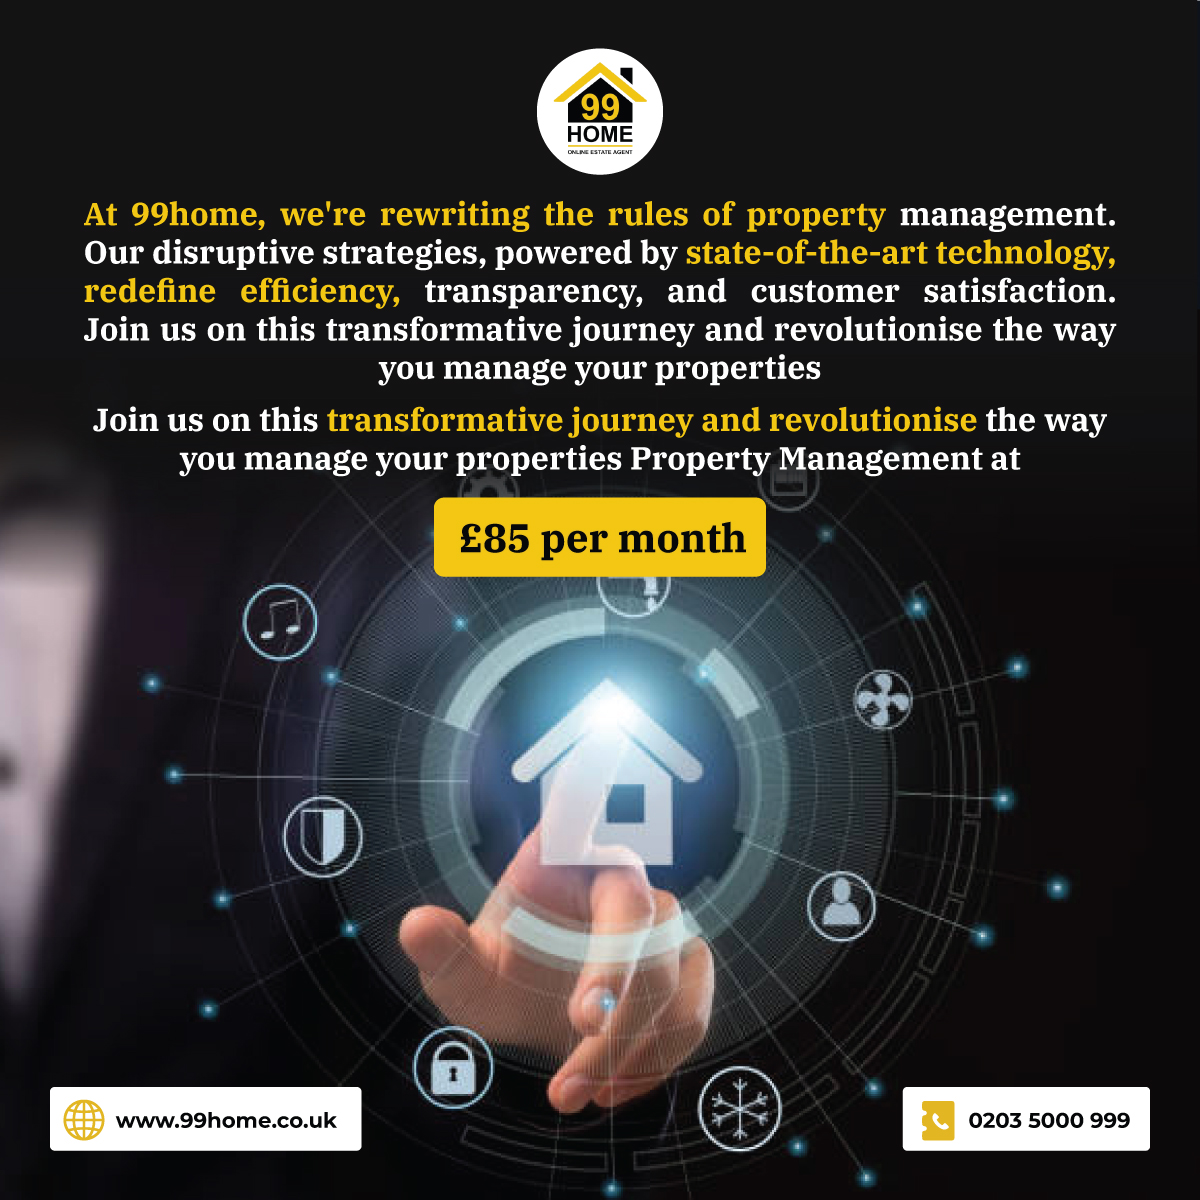 Check here: 99home.co.uk/property-manag… 

Join us on this transformative journey and revolutionise the way you manage your properties Property Management at £85 / Month.

#SellProperty #SellHouse #SellHome #Buy #Sell #Let #OnlineEstateAgent #99home